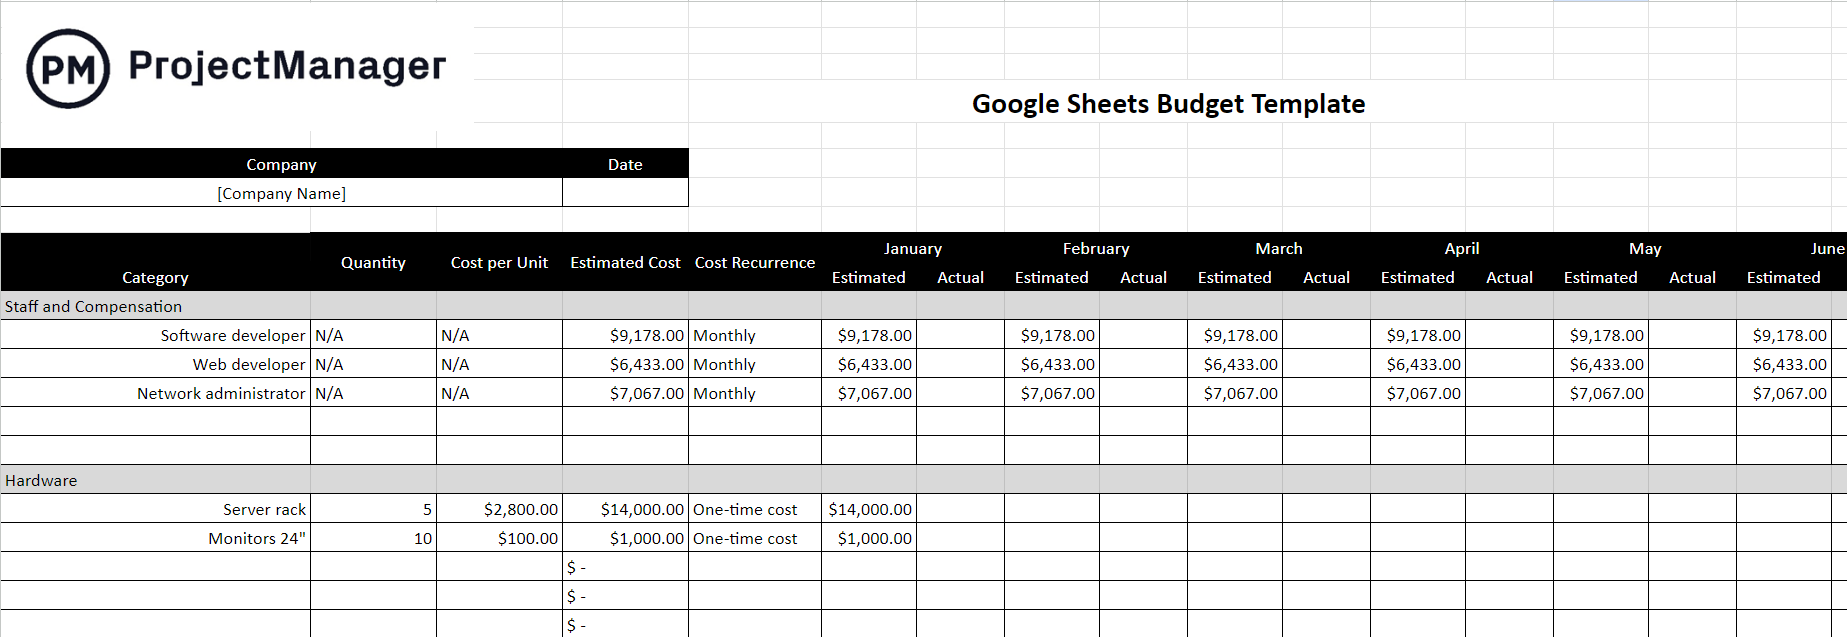 ProjectManager's Google Sheets budget template